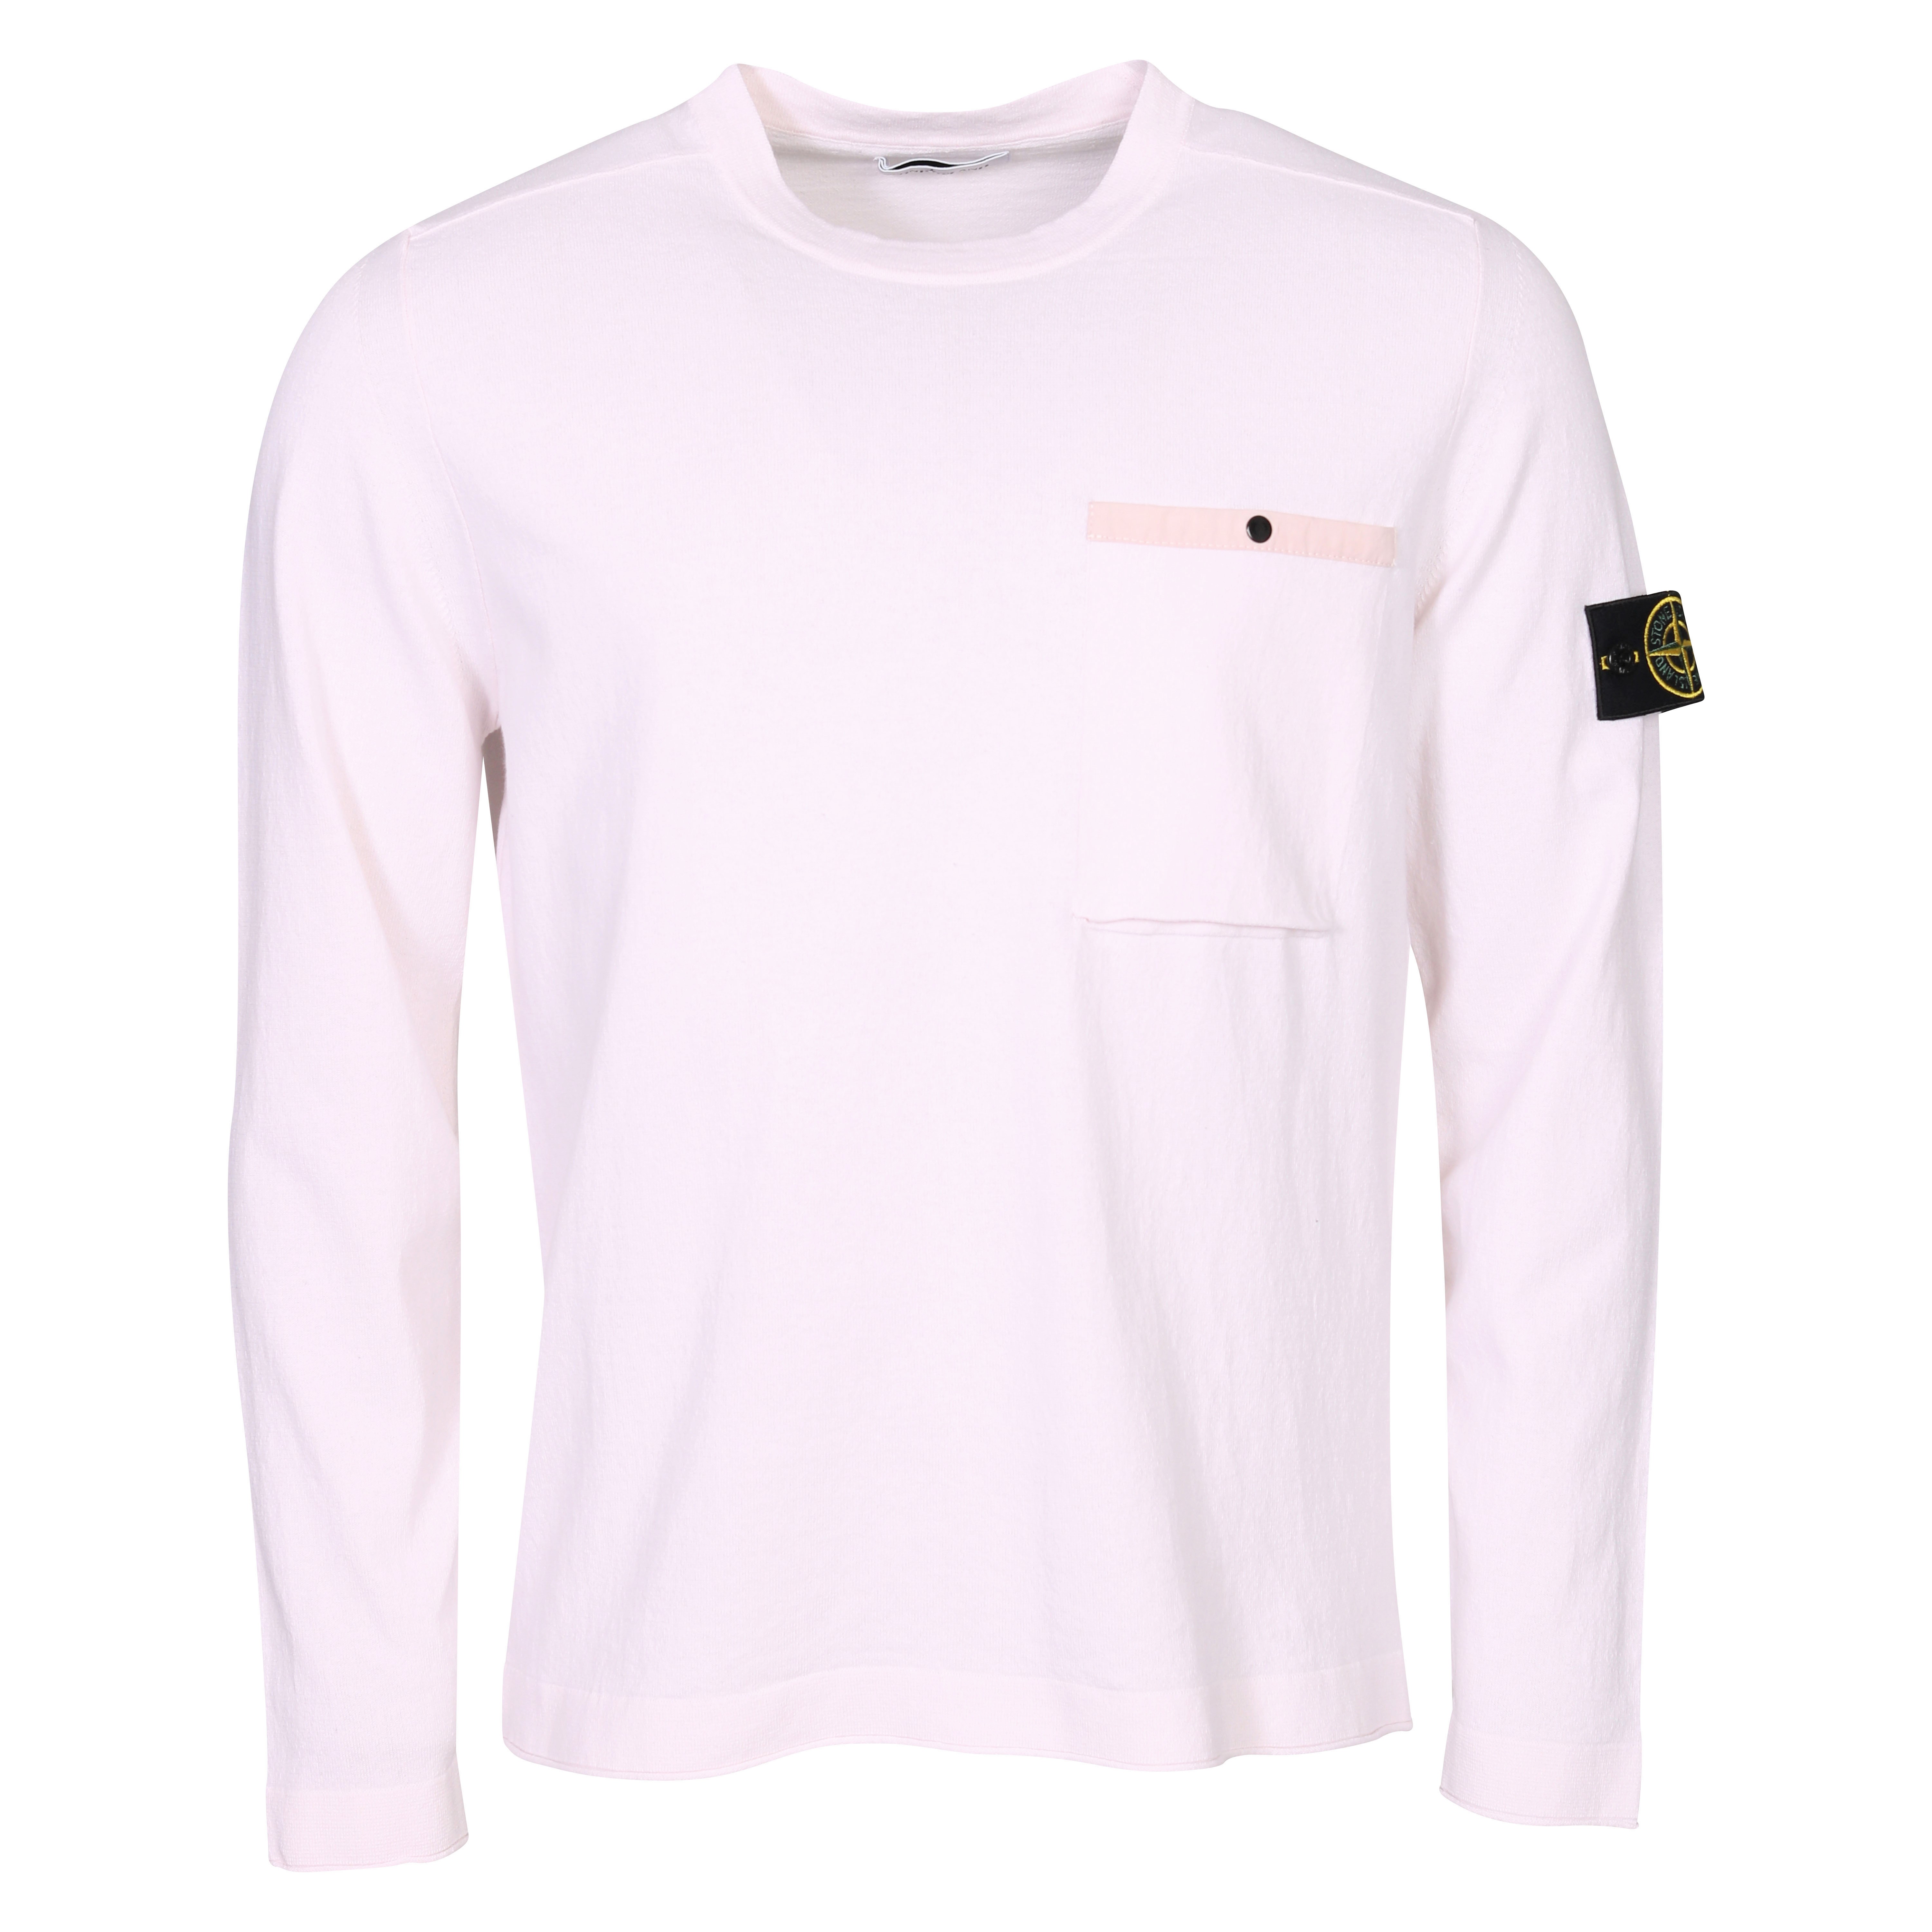 Stone Island Chest Pocket Knit Sweater in Light Pink S